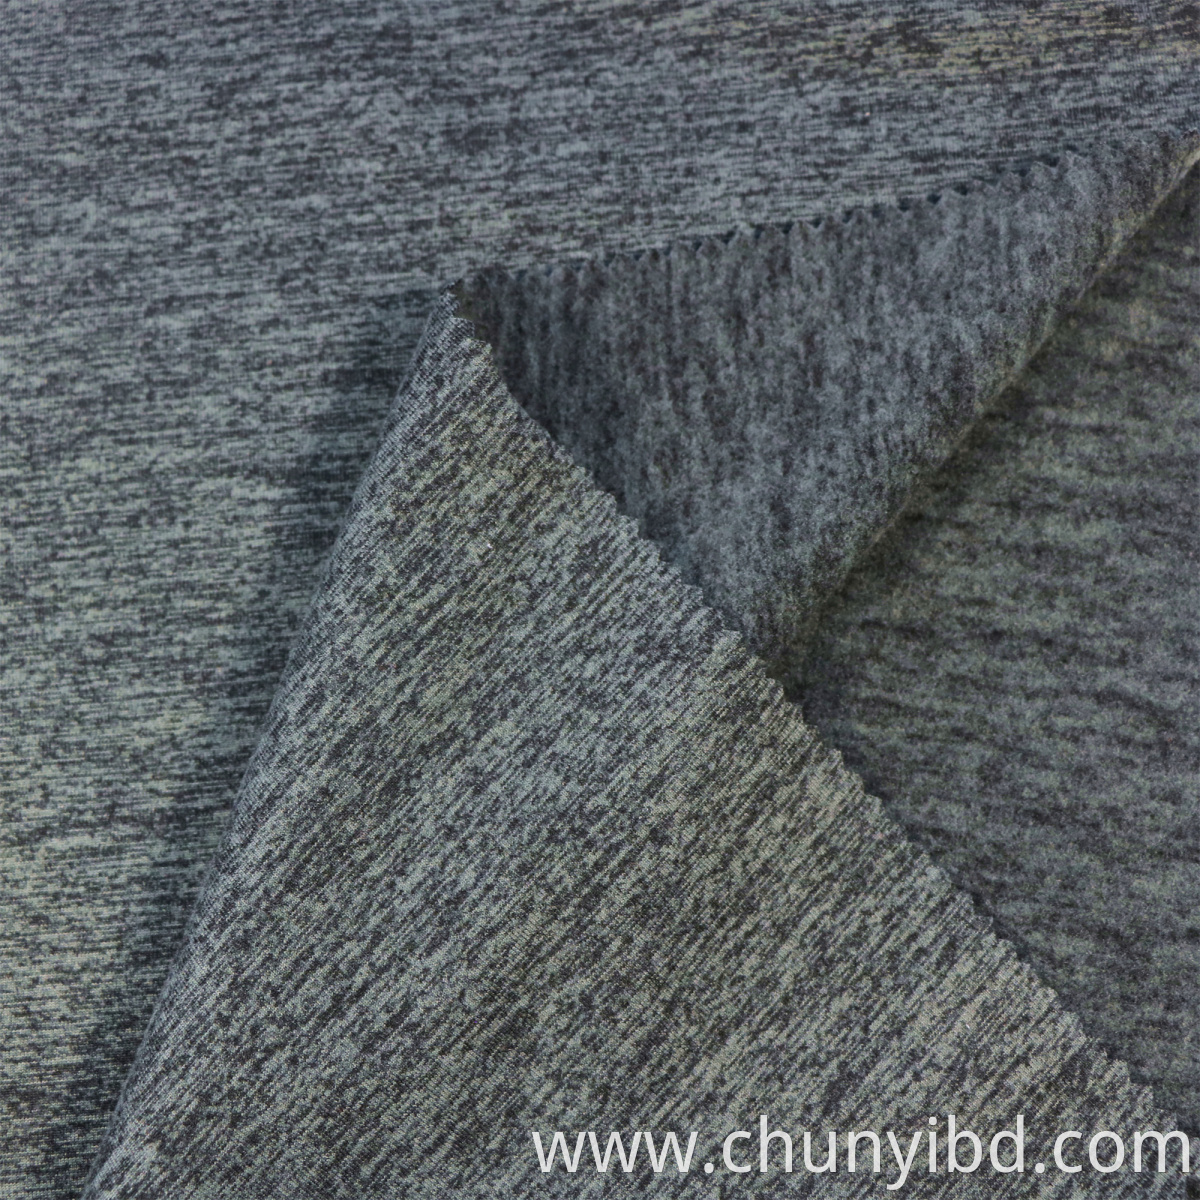 100% Polyester Spun fleece one side brushed fabric